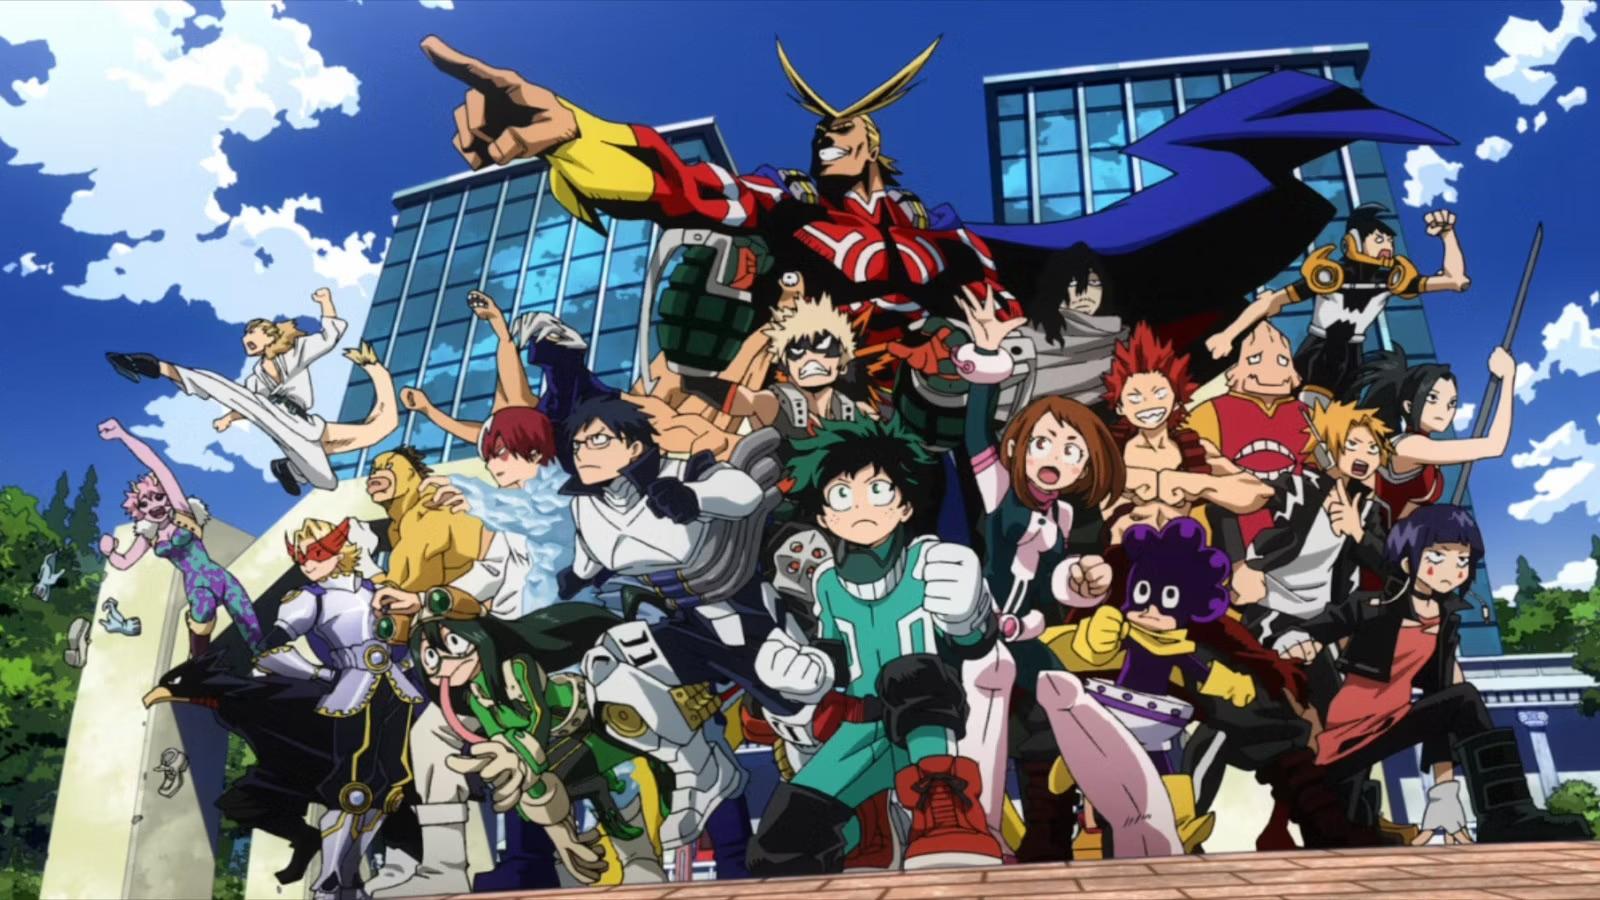 All Might and Class 1-A